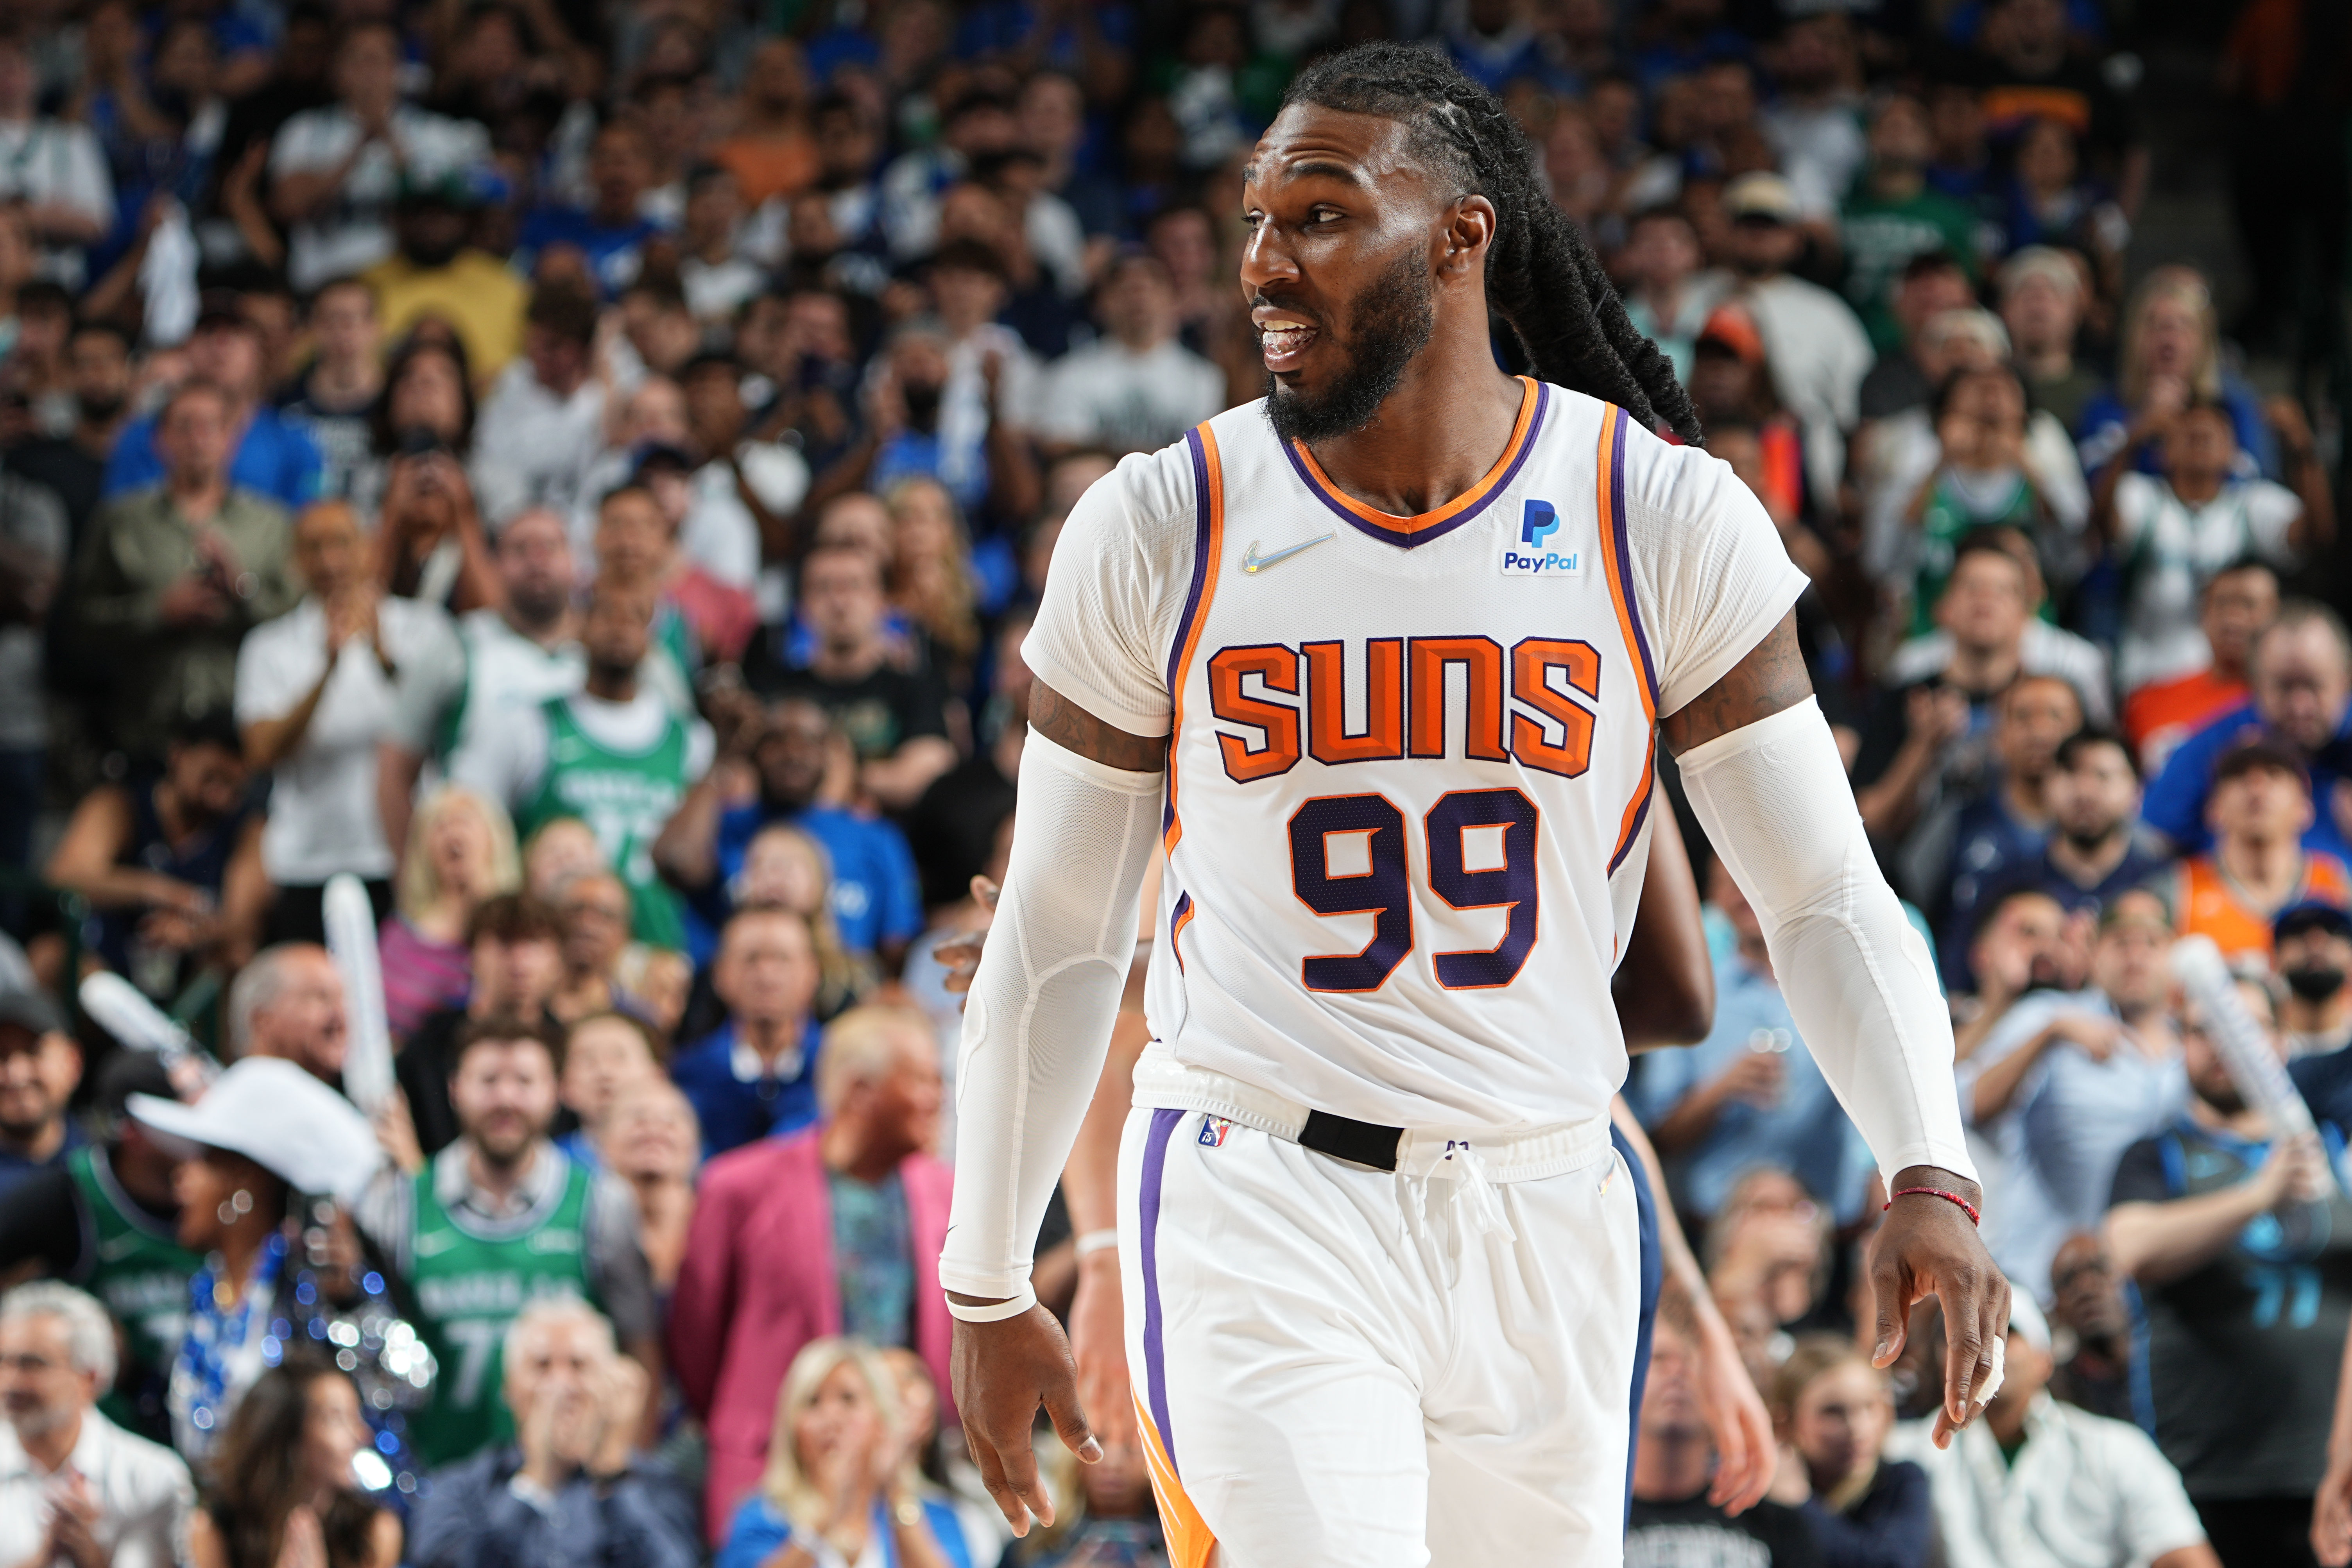 Jae Crowder of the Phoenix Suns. looks on during the game against the Dallas Mavericks during Game 6 of the 2022 NBA Playoffs Western Conference Semifinals on May 12, 2022 at the American Airlines Center in Dallas, Texas.